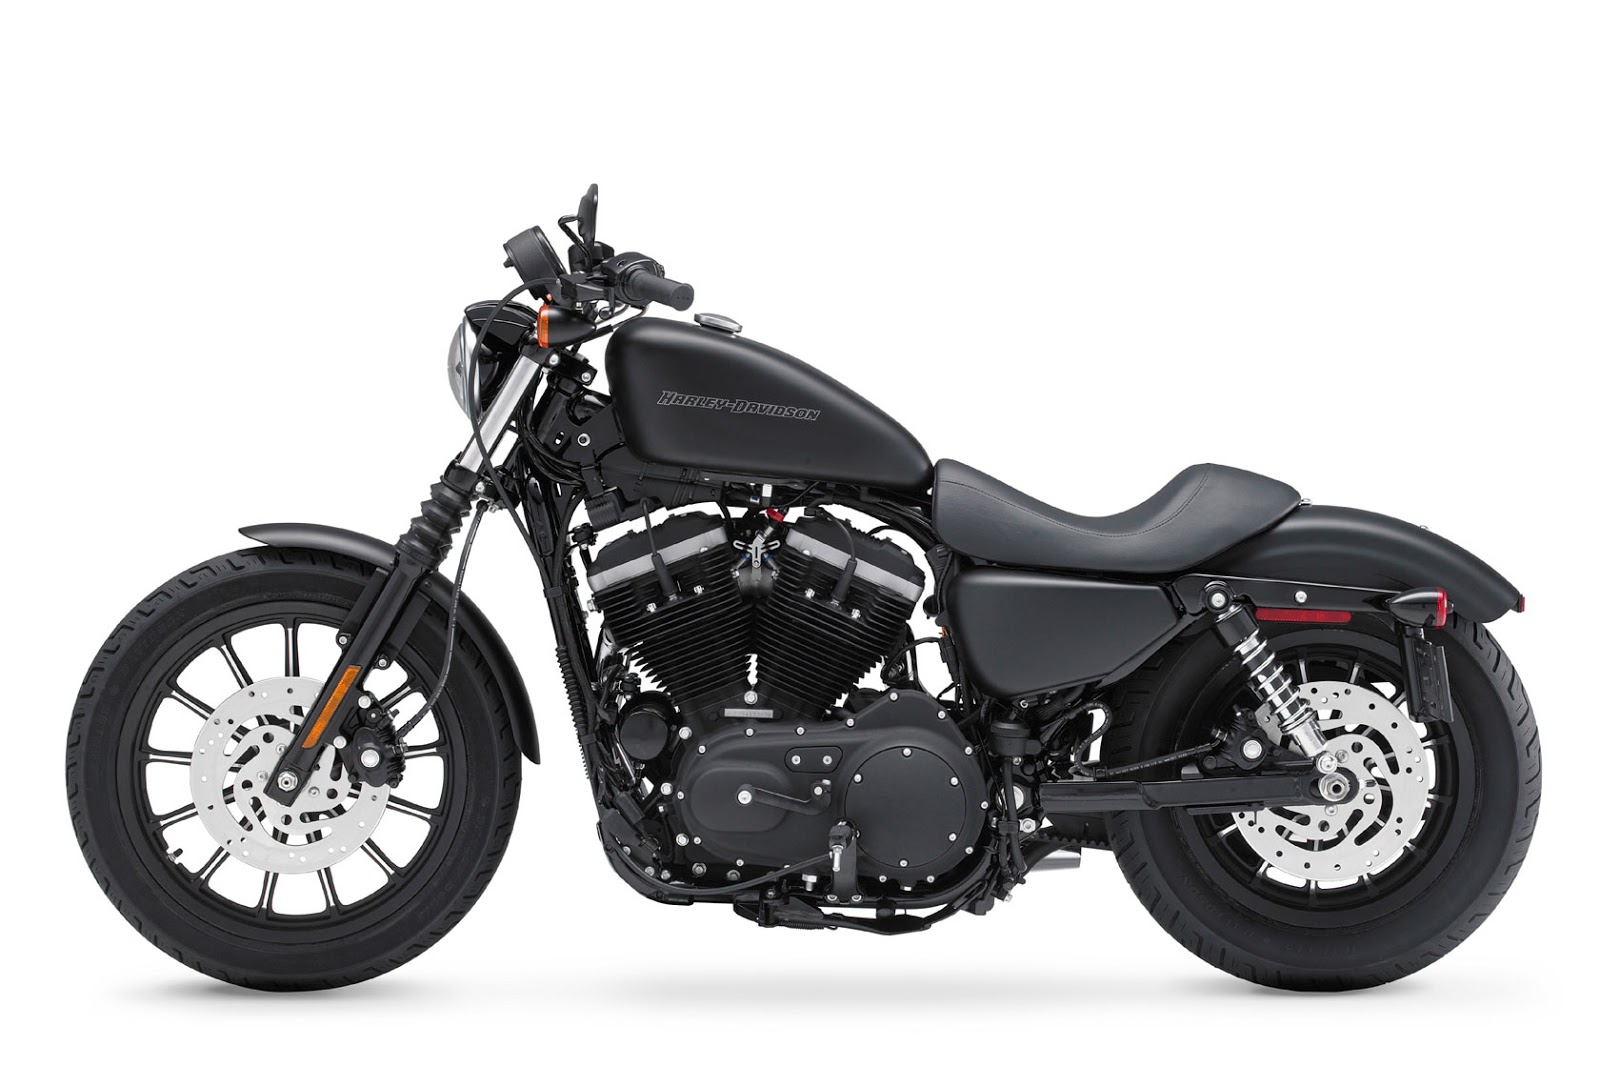 MOTORCYCLES - MOTORCYCLE NEWS AND REVIEWS: HARLEY DAVIDSON SPORTSTER